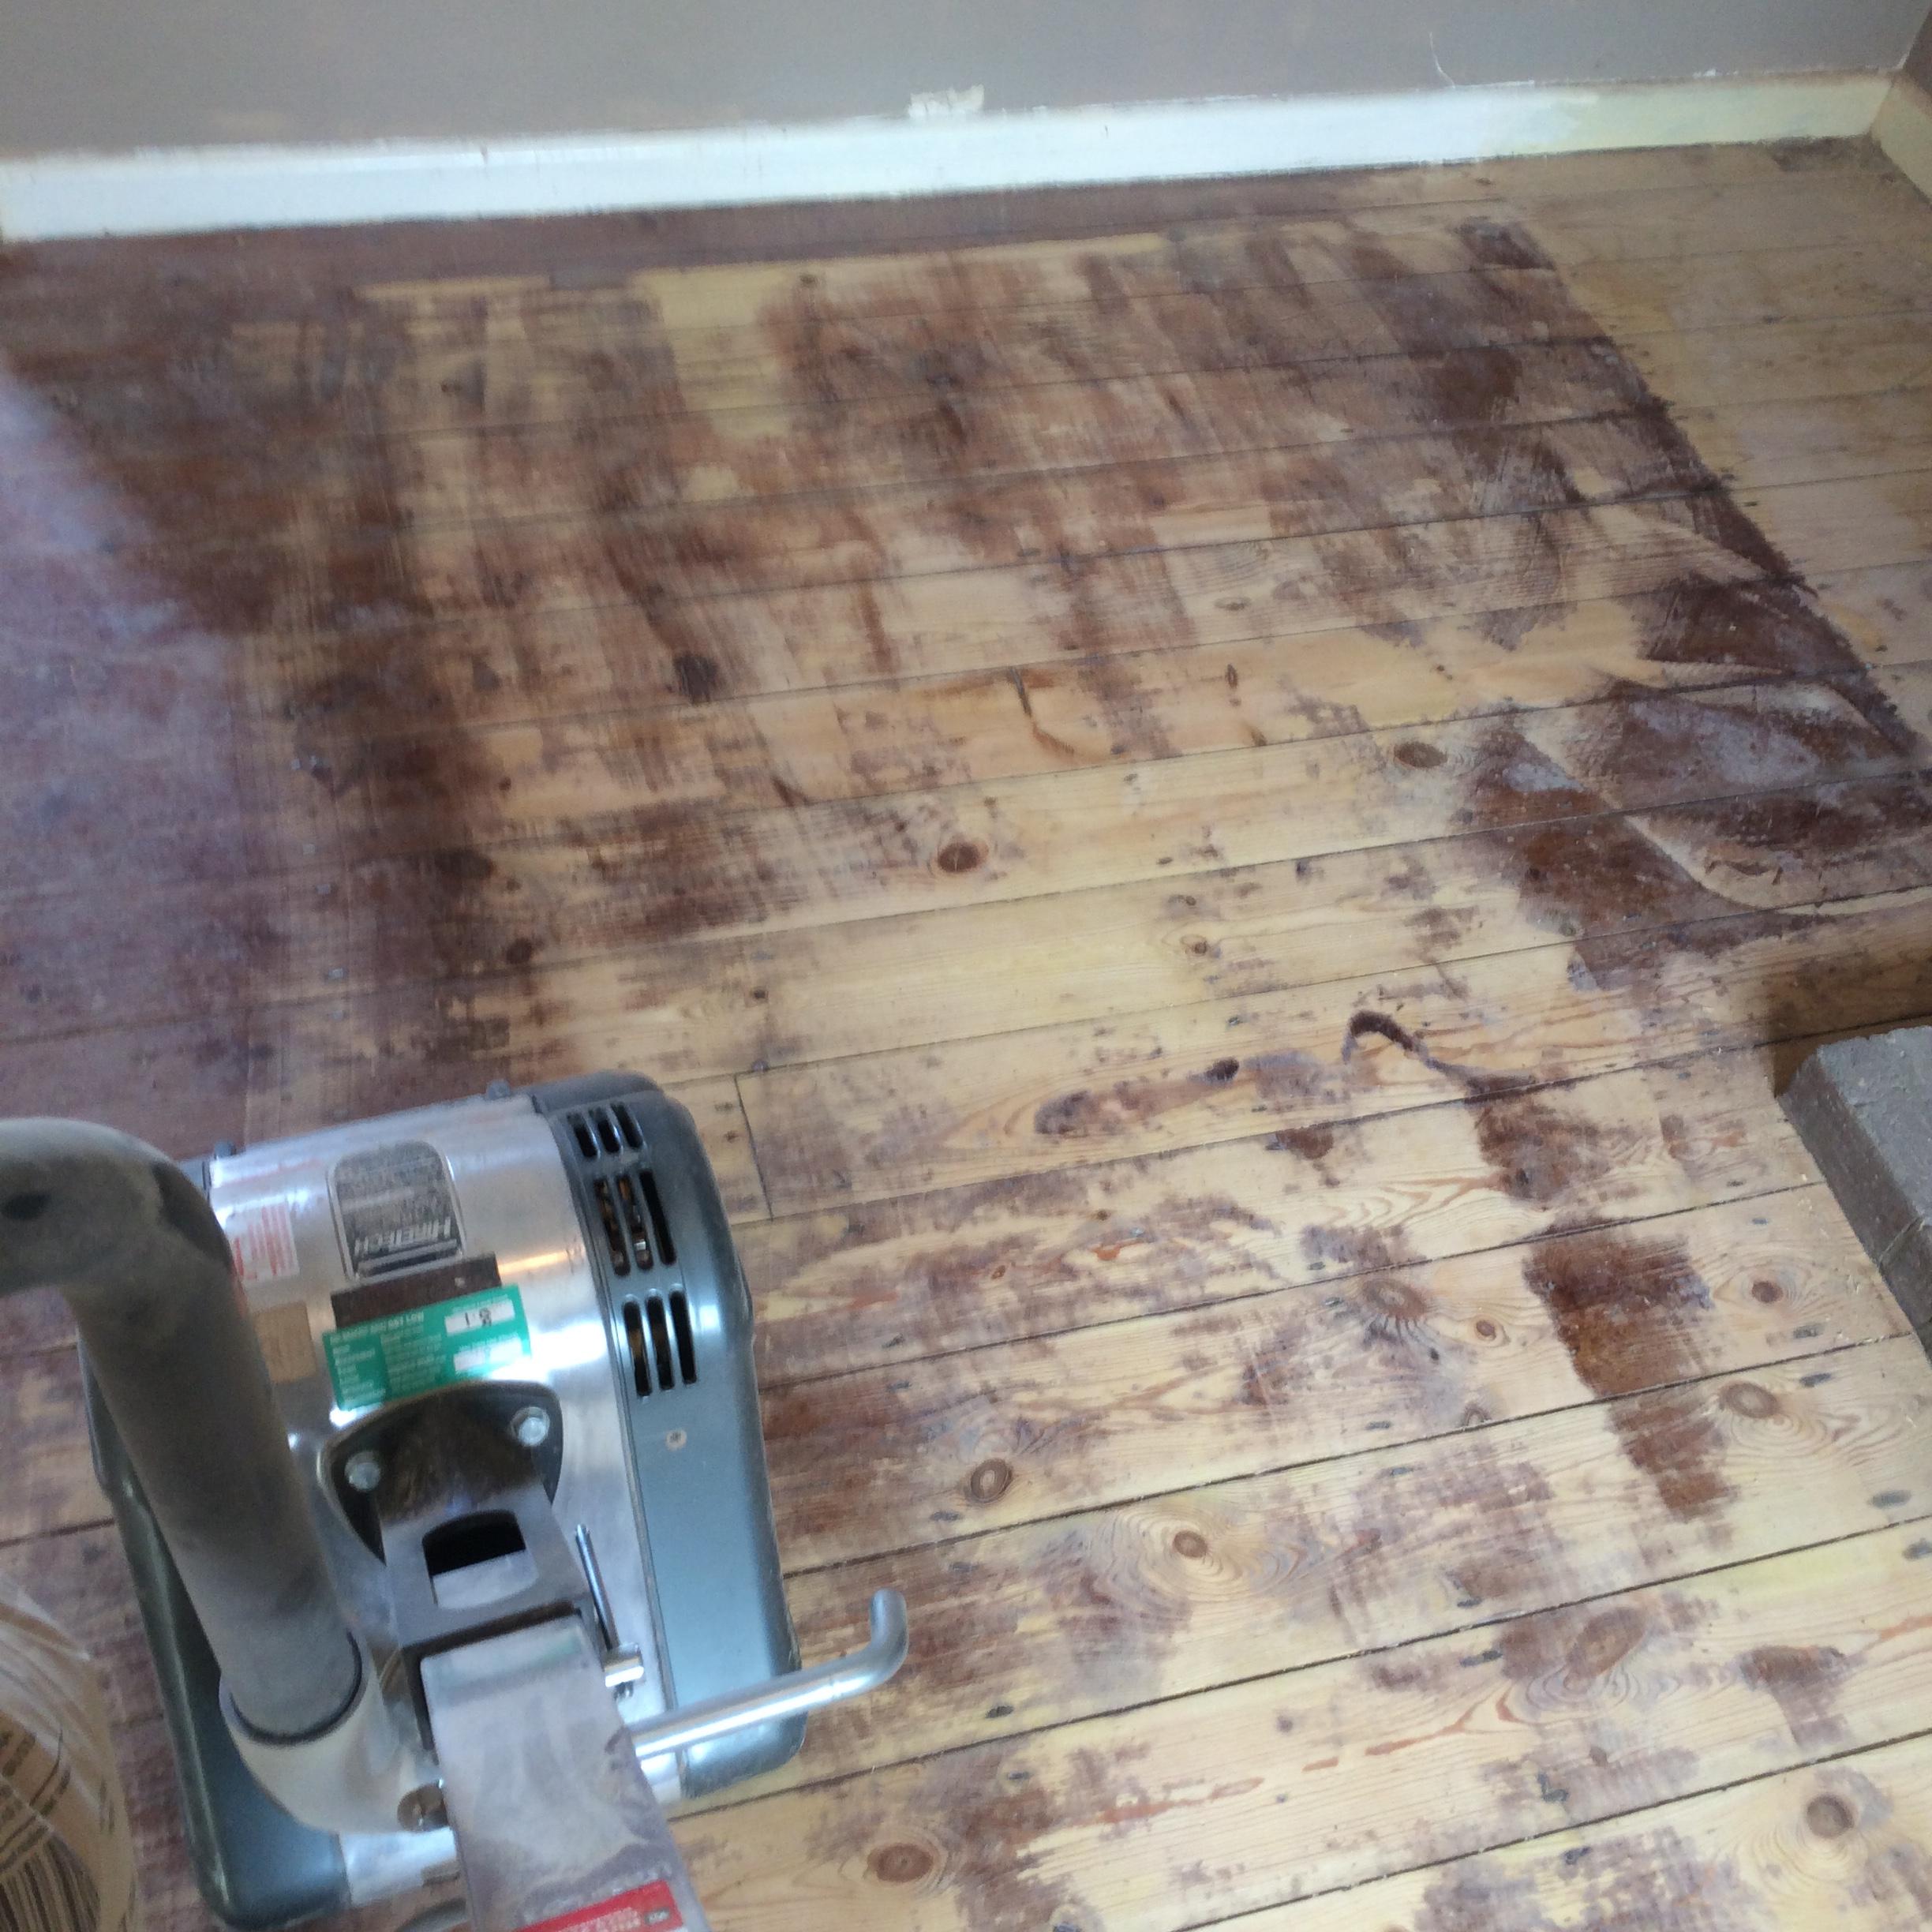 We use heavy duty floor sanding equipment to strip back wood flooring to its bare state